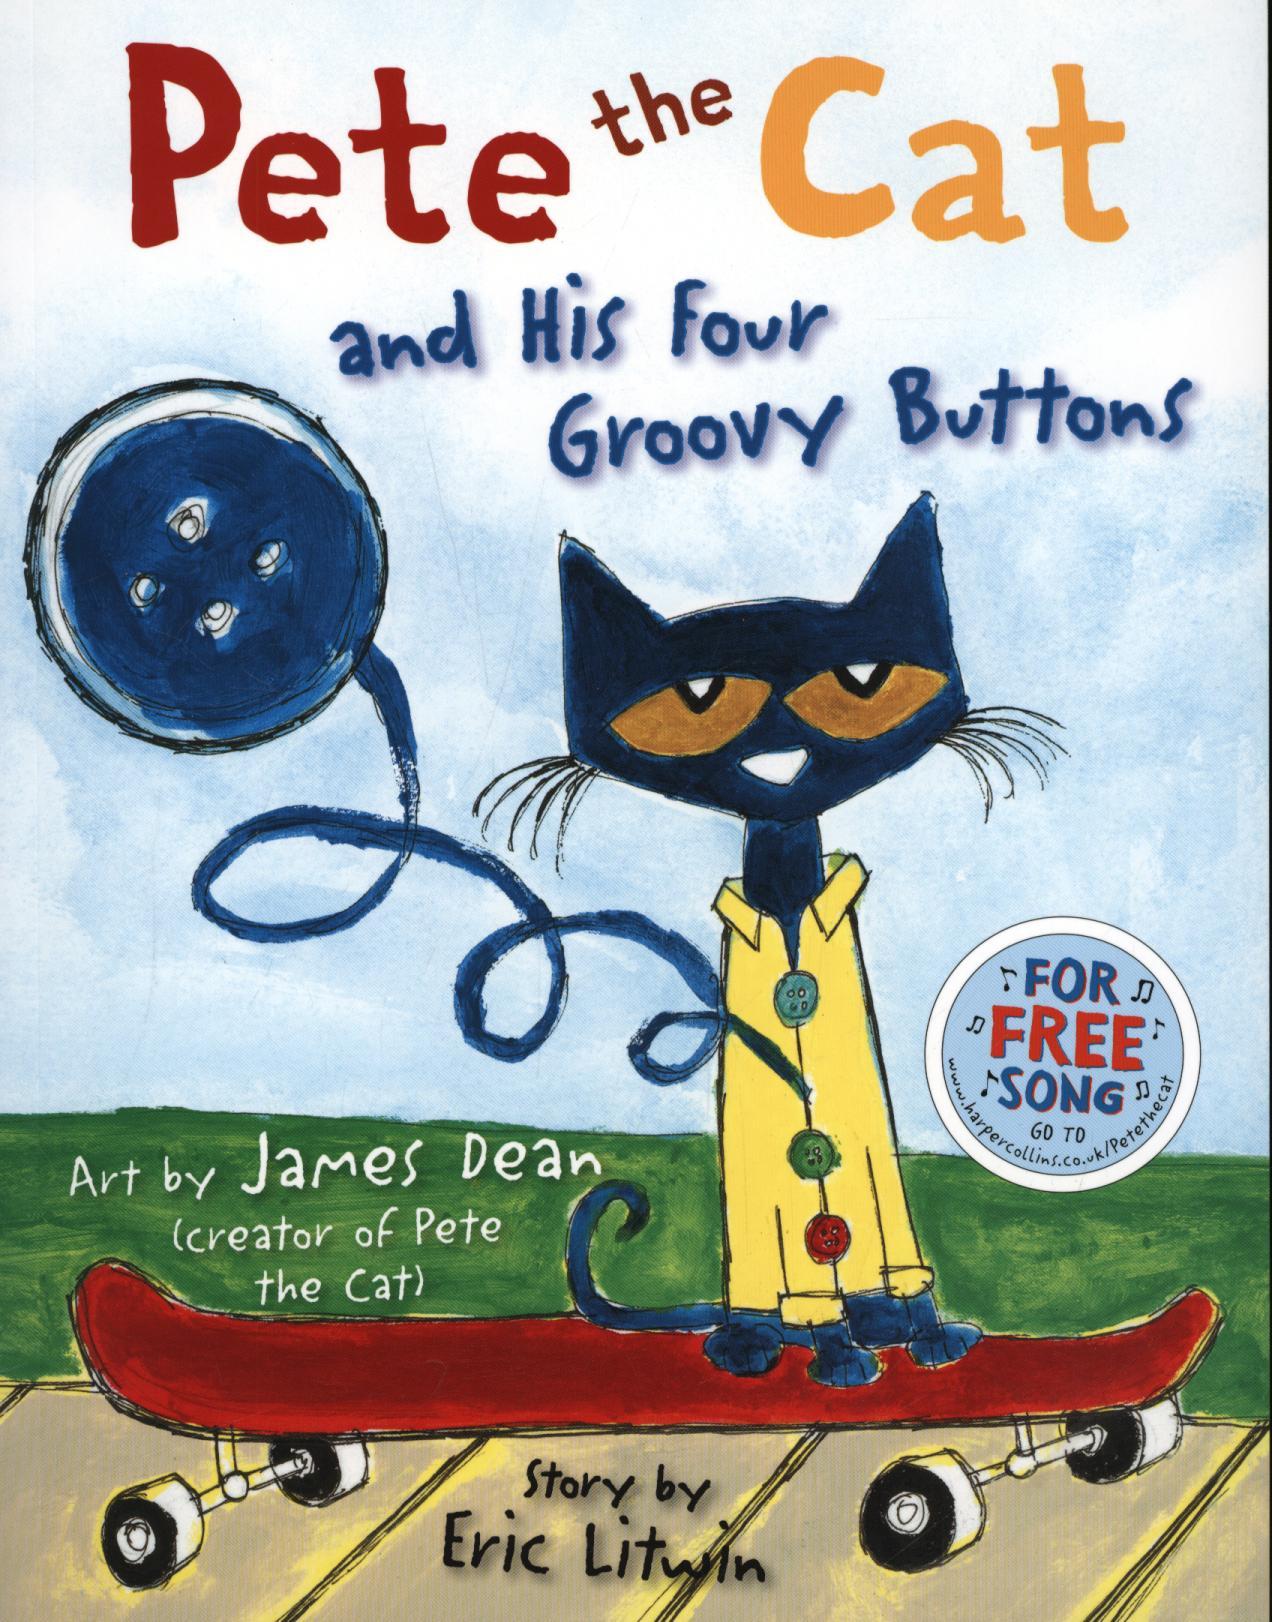 Pete the Cat and his Four Groovy Buttons - Eric Litwin